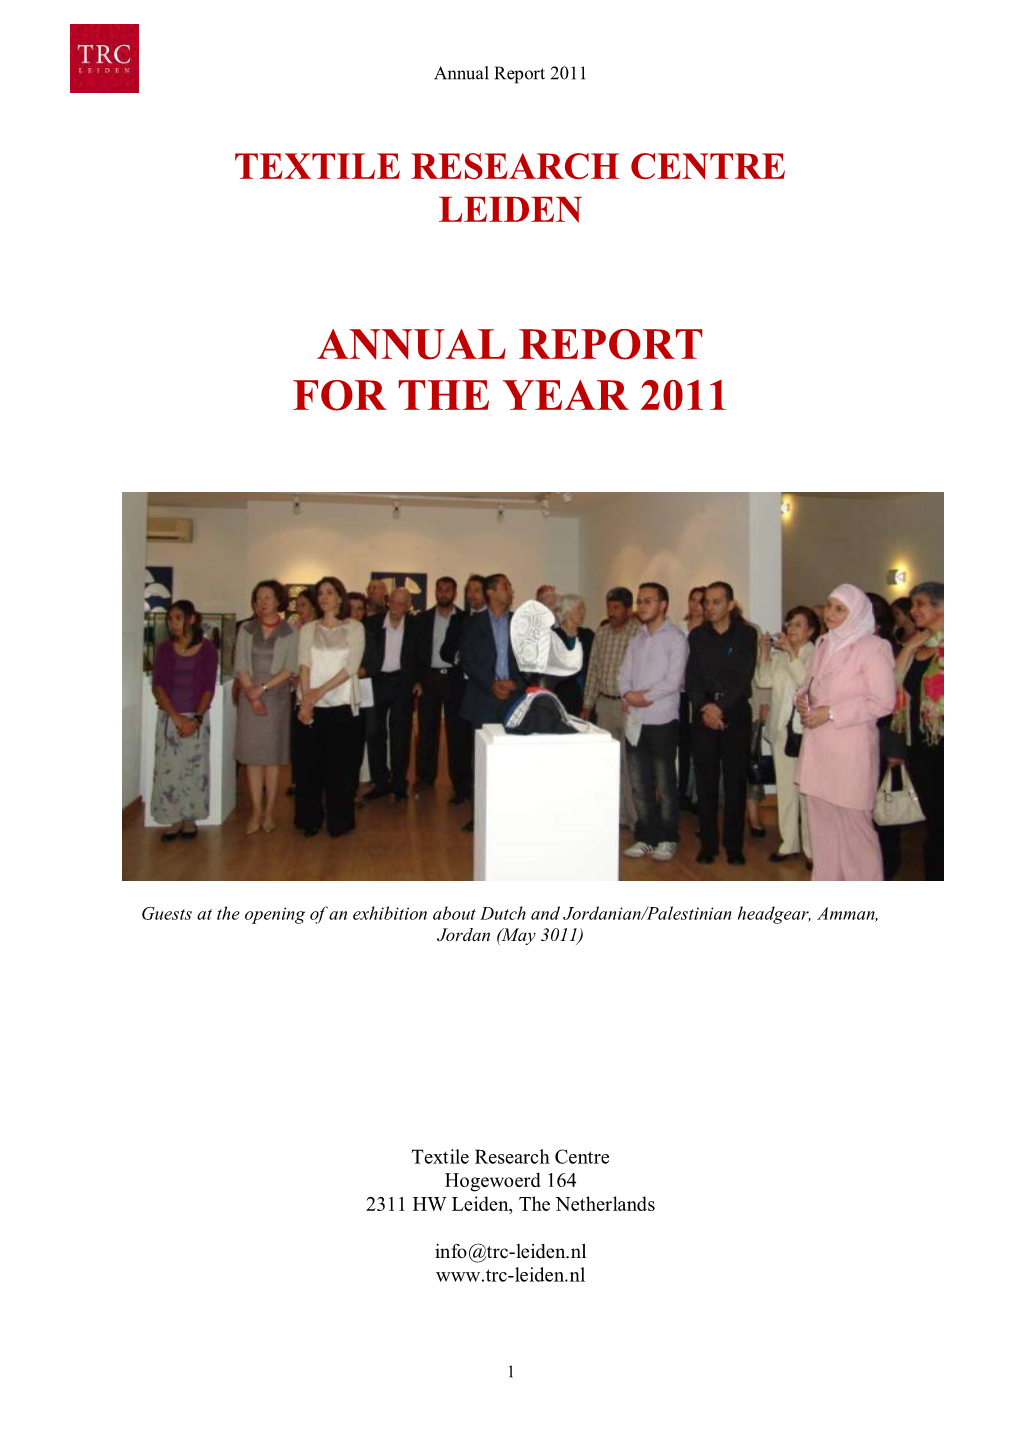 Textile Research Centre Leiden Annual Report for the Year 2011